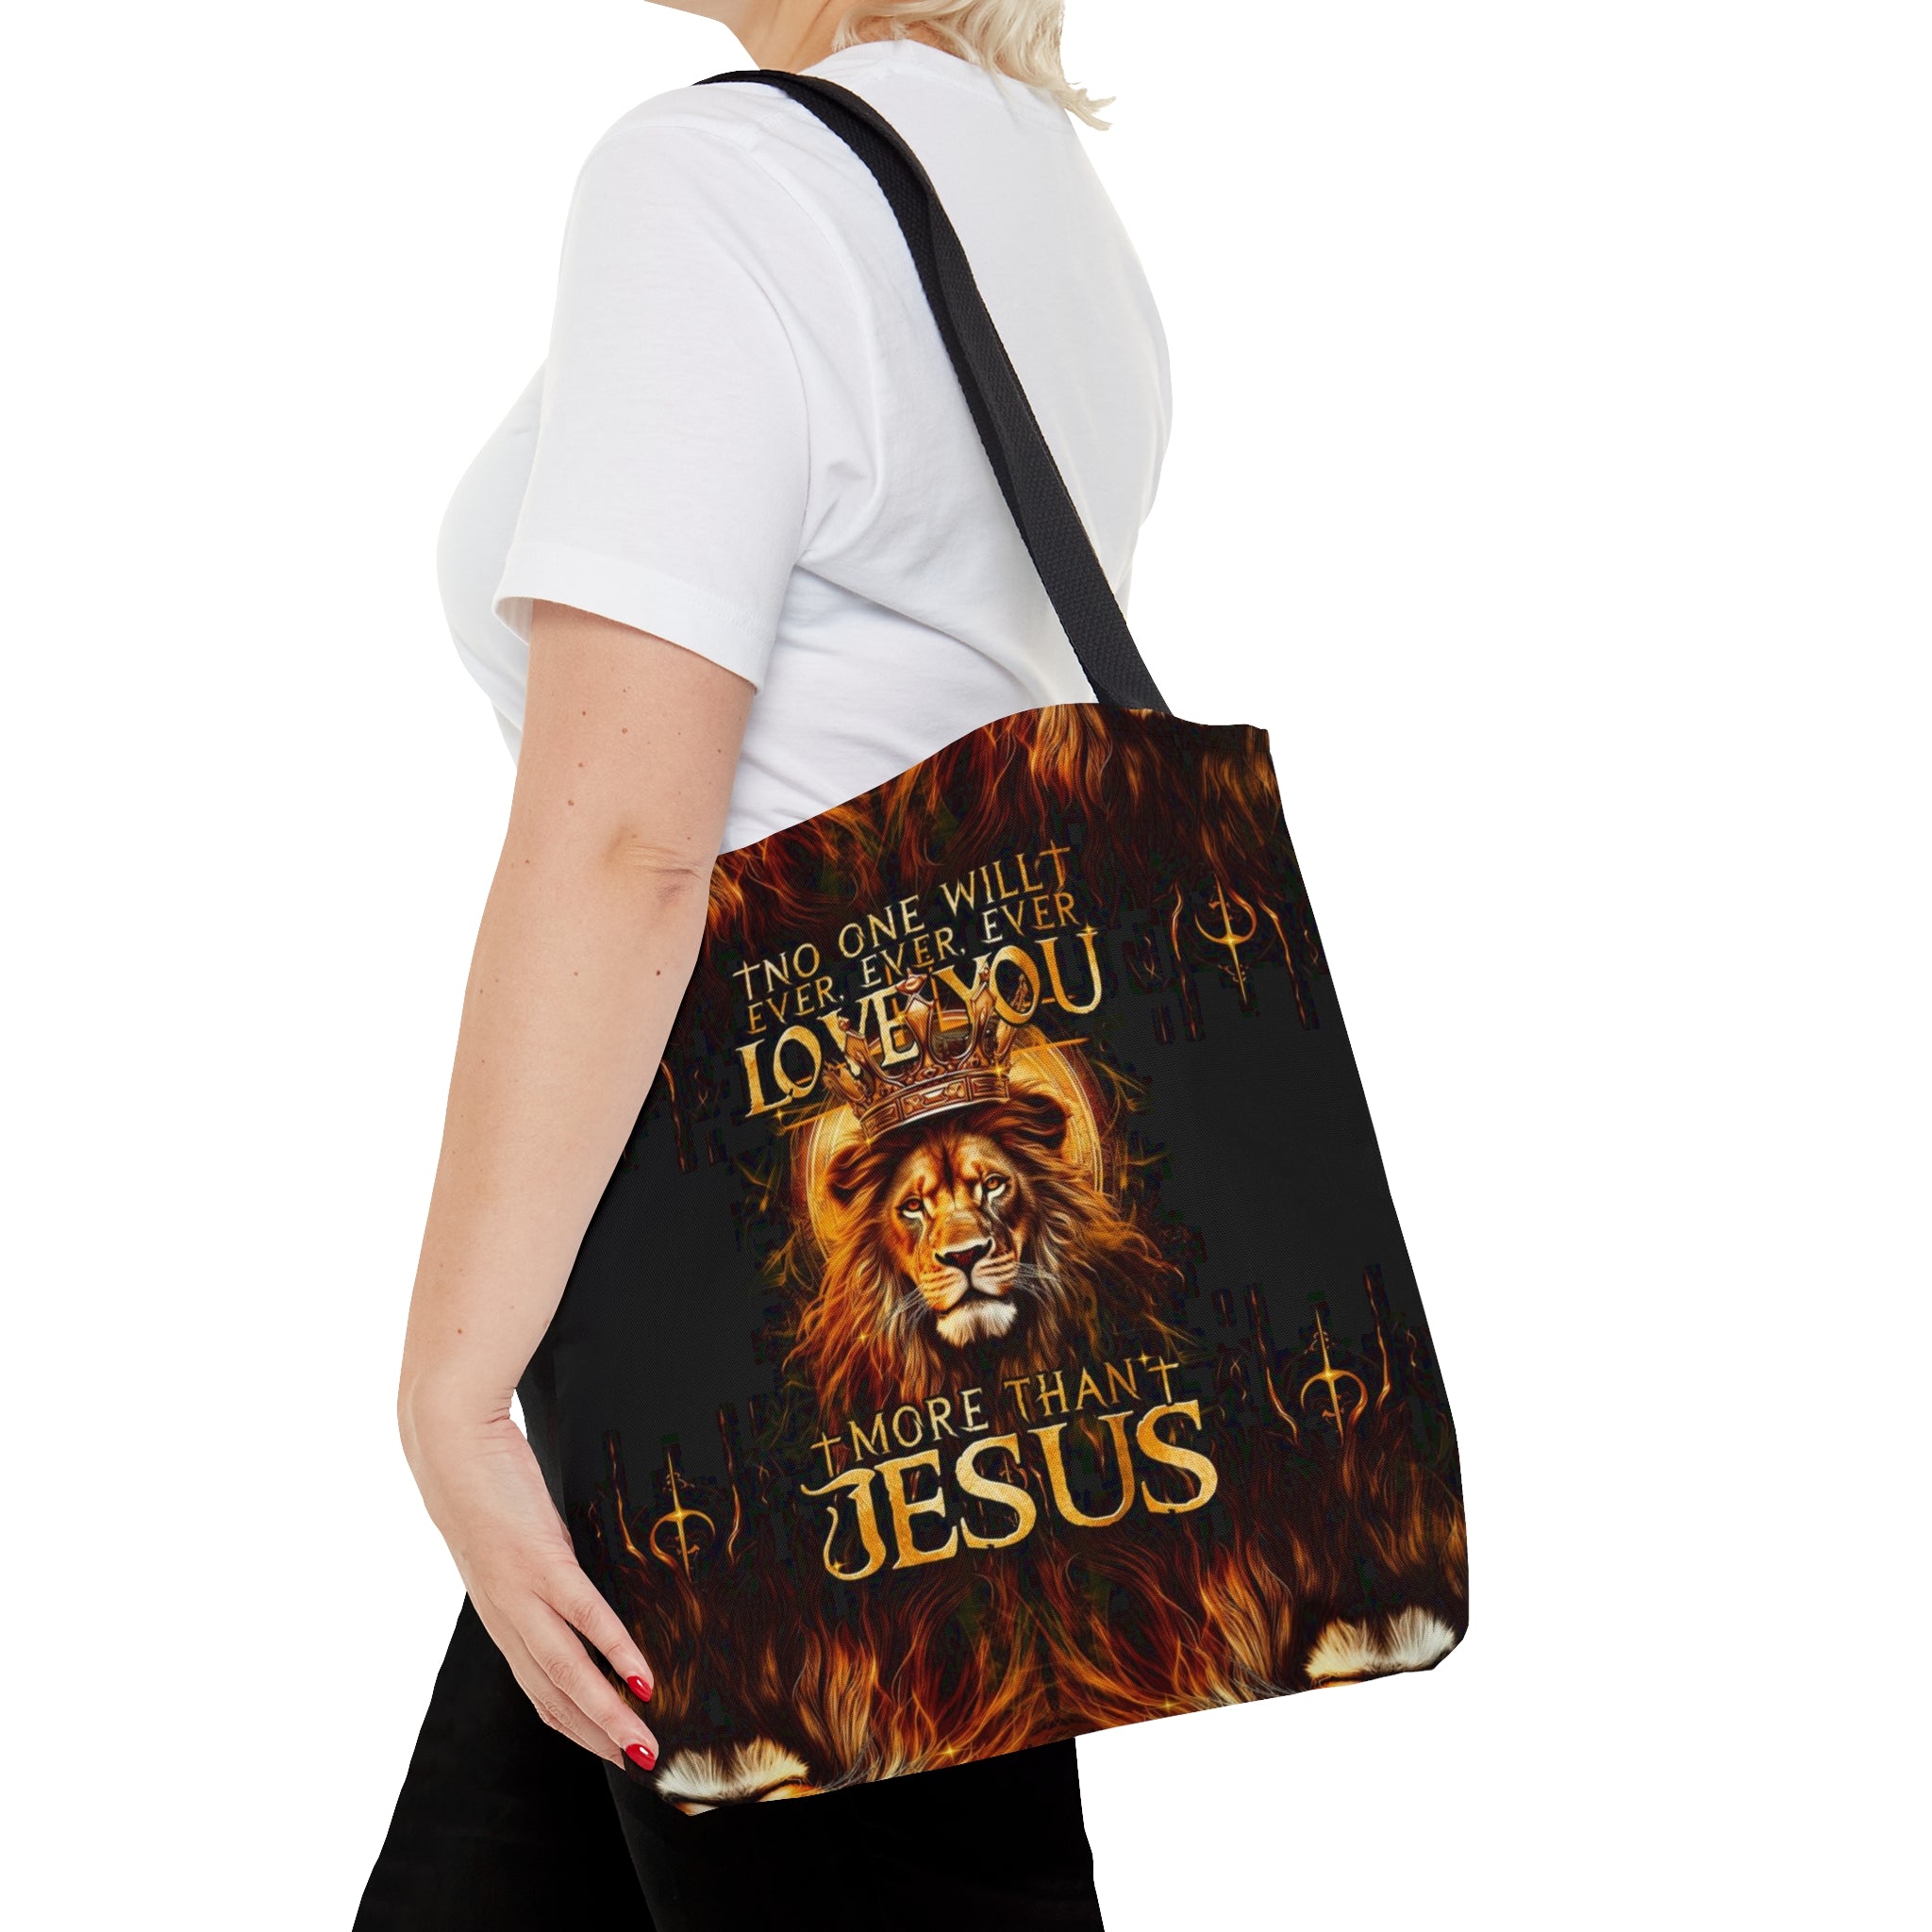 No One Will Ever Love You More Than Jesus Tote Bag - Tytm3006238